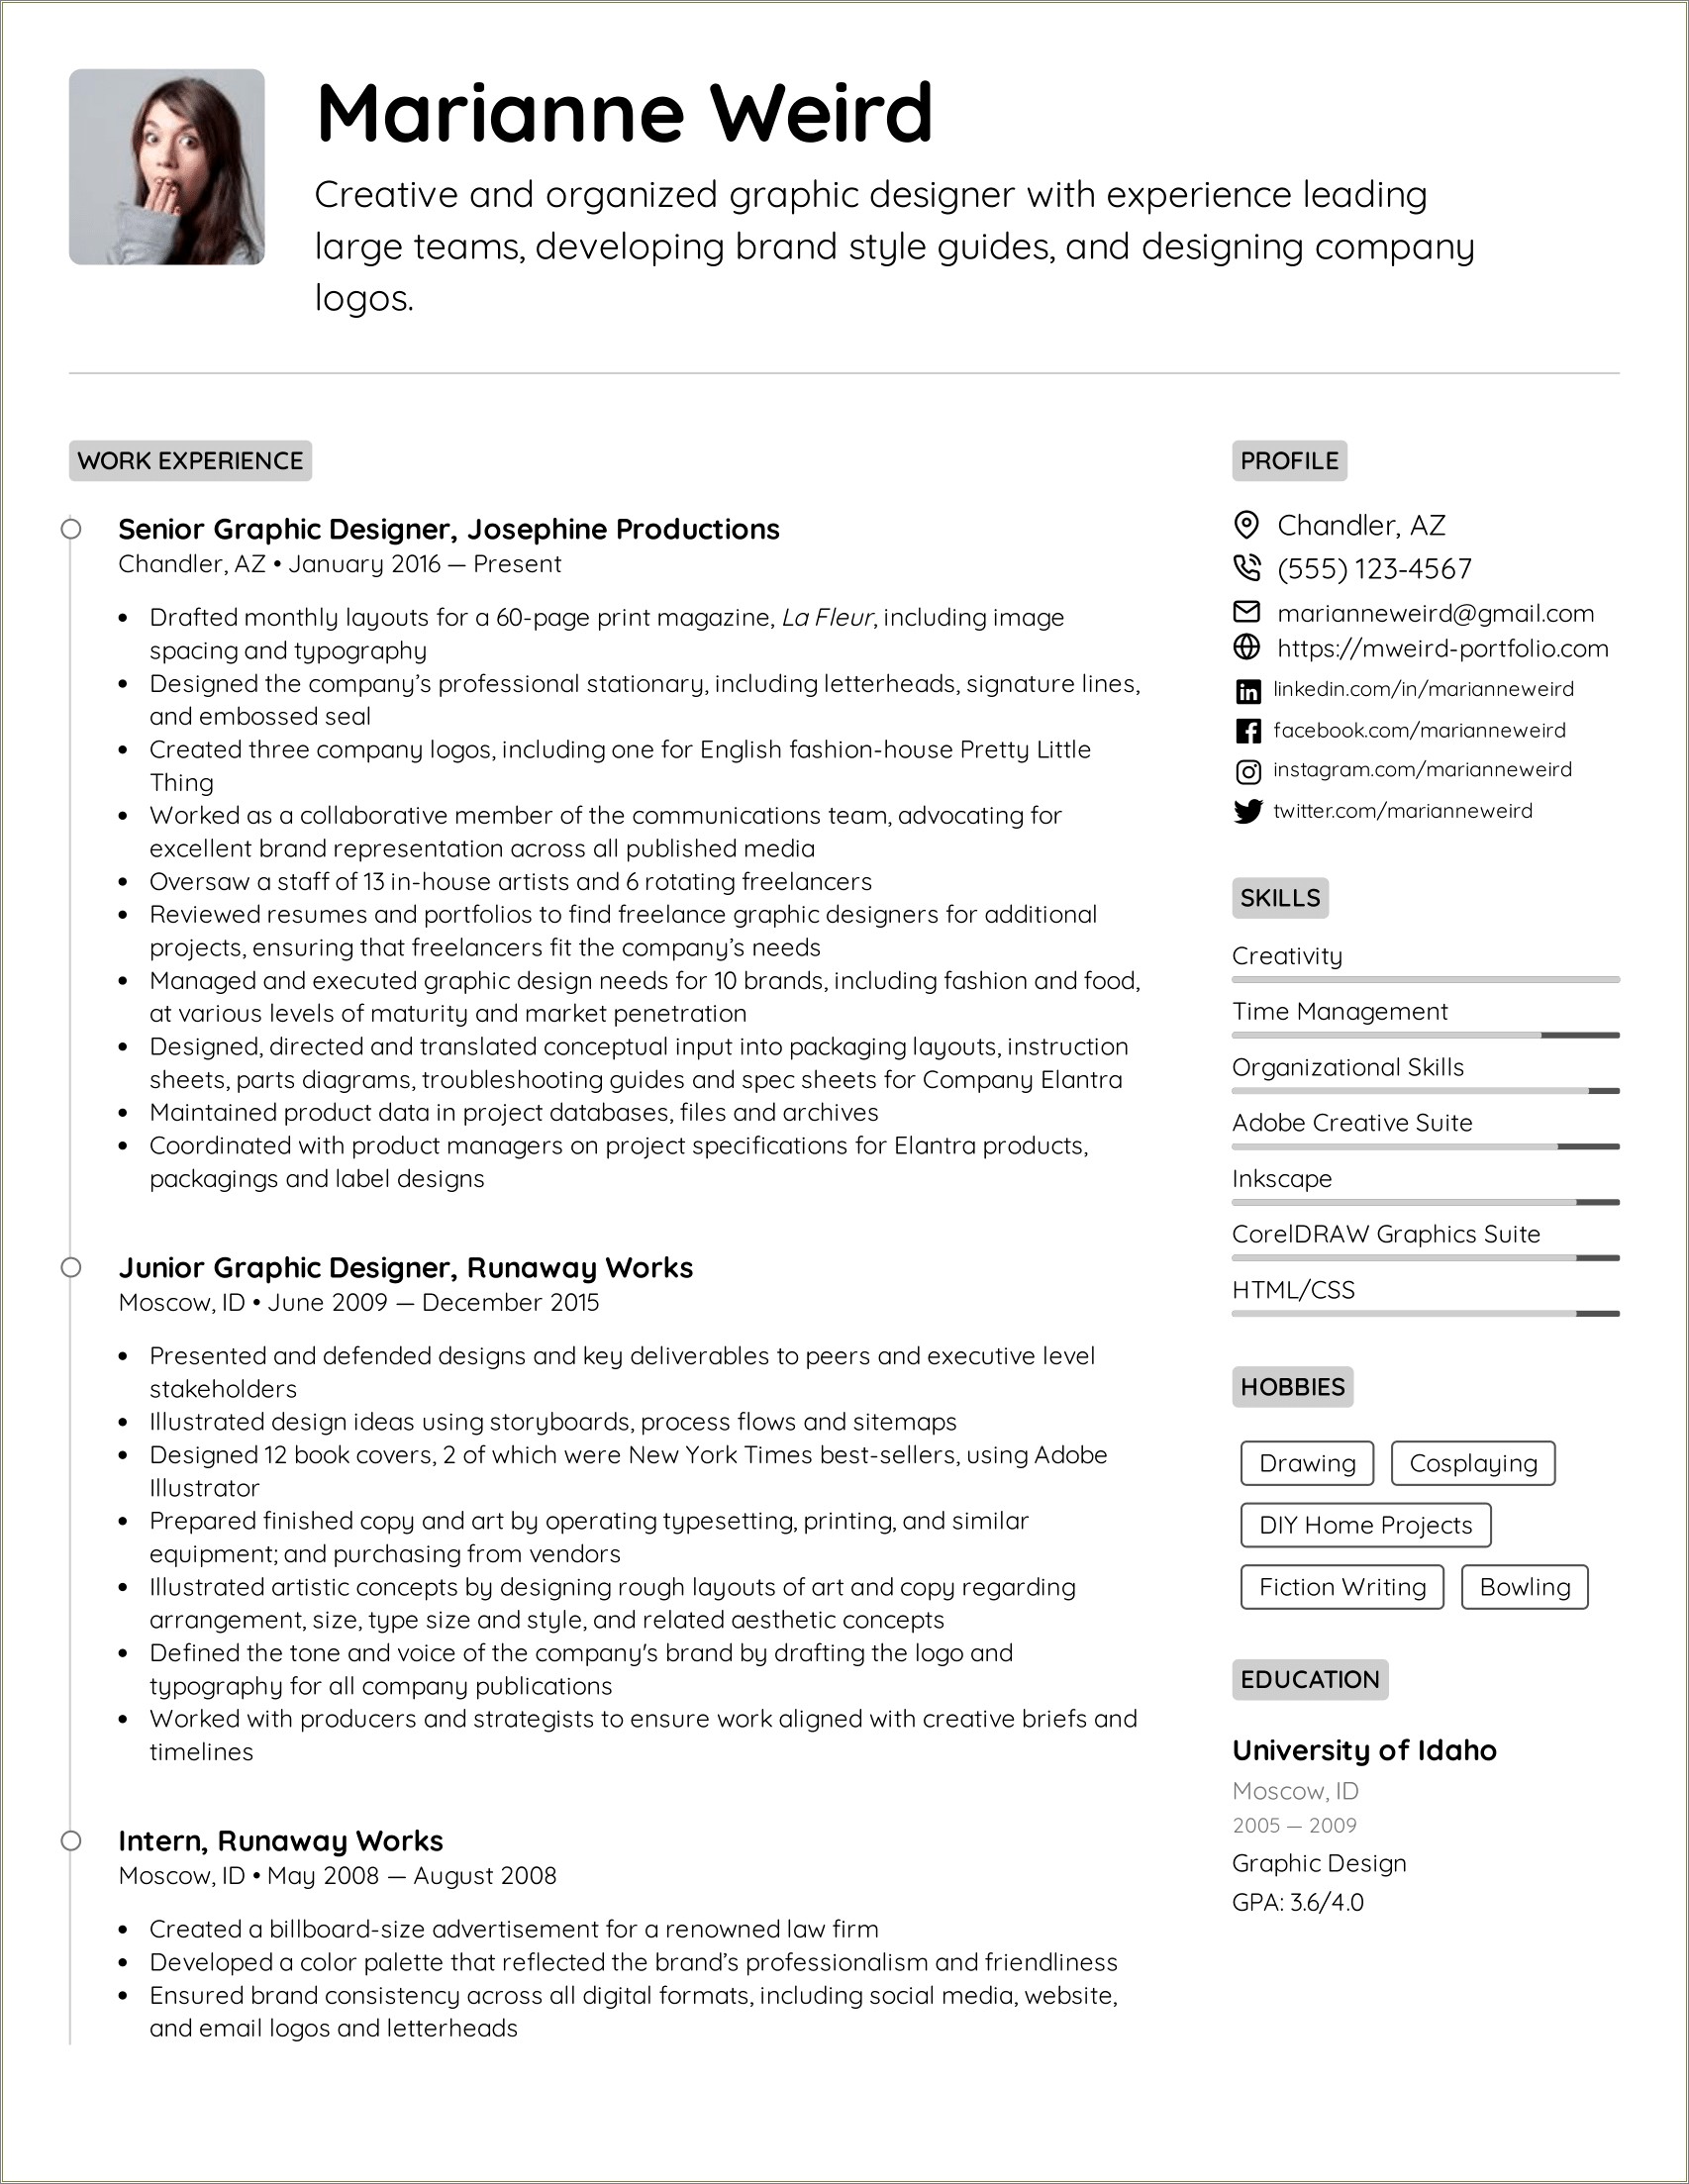 Sample Computer Skills Section Of Resume